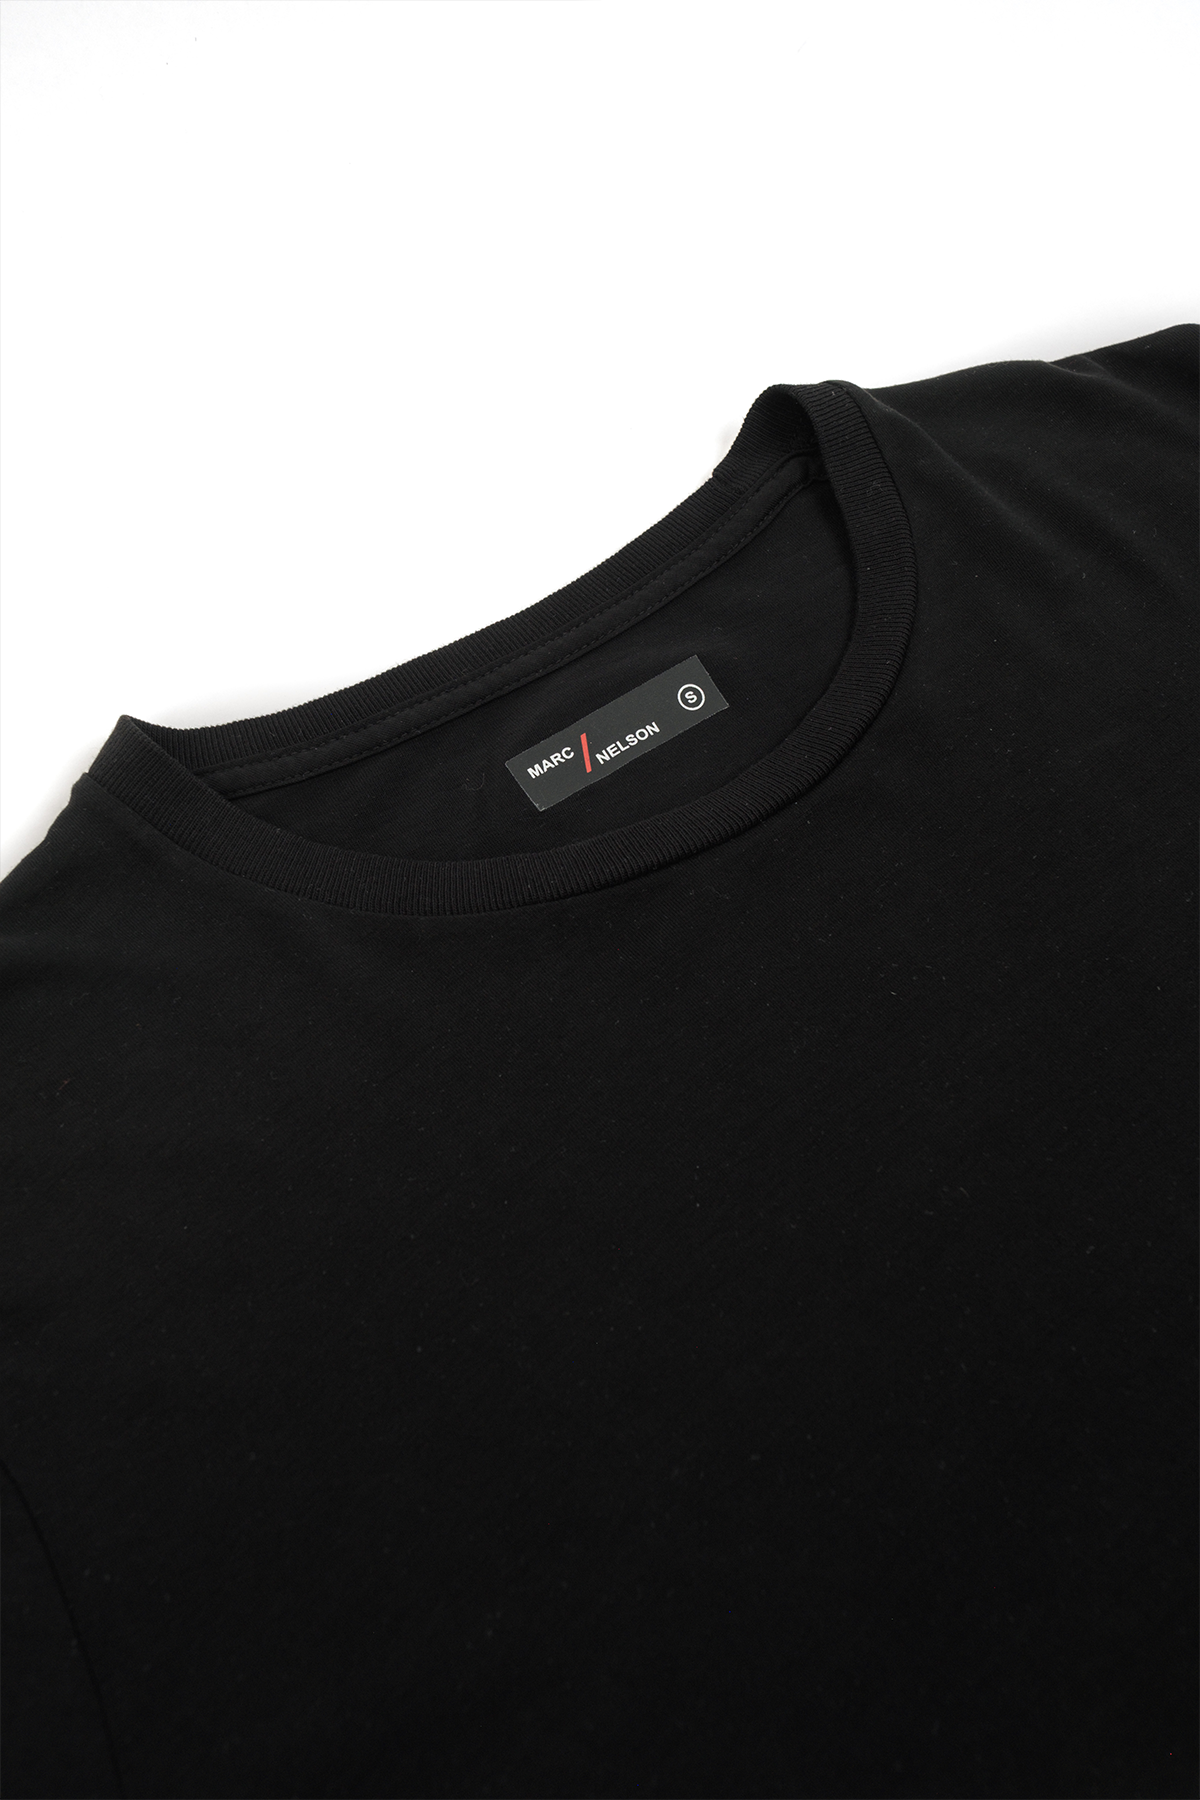 Close up of a black crew neck t-shirt laid out on a white background.